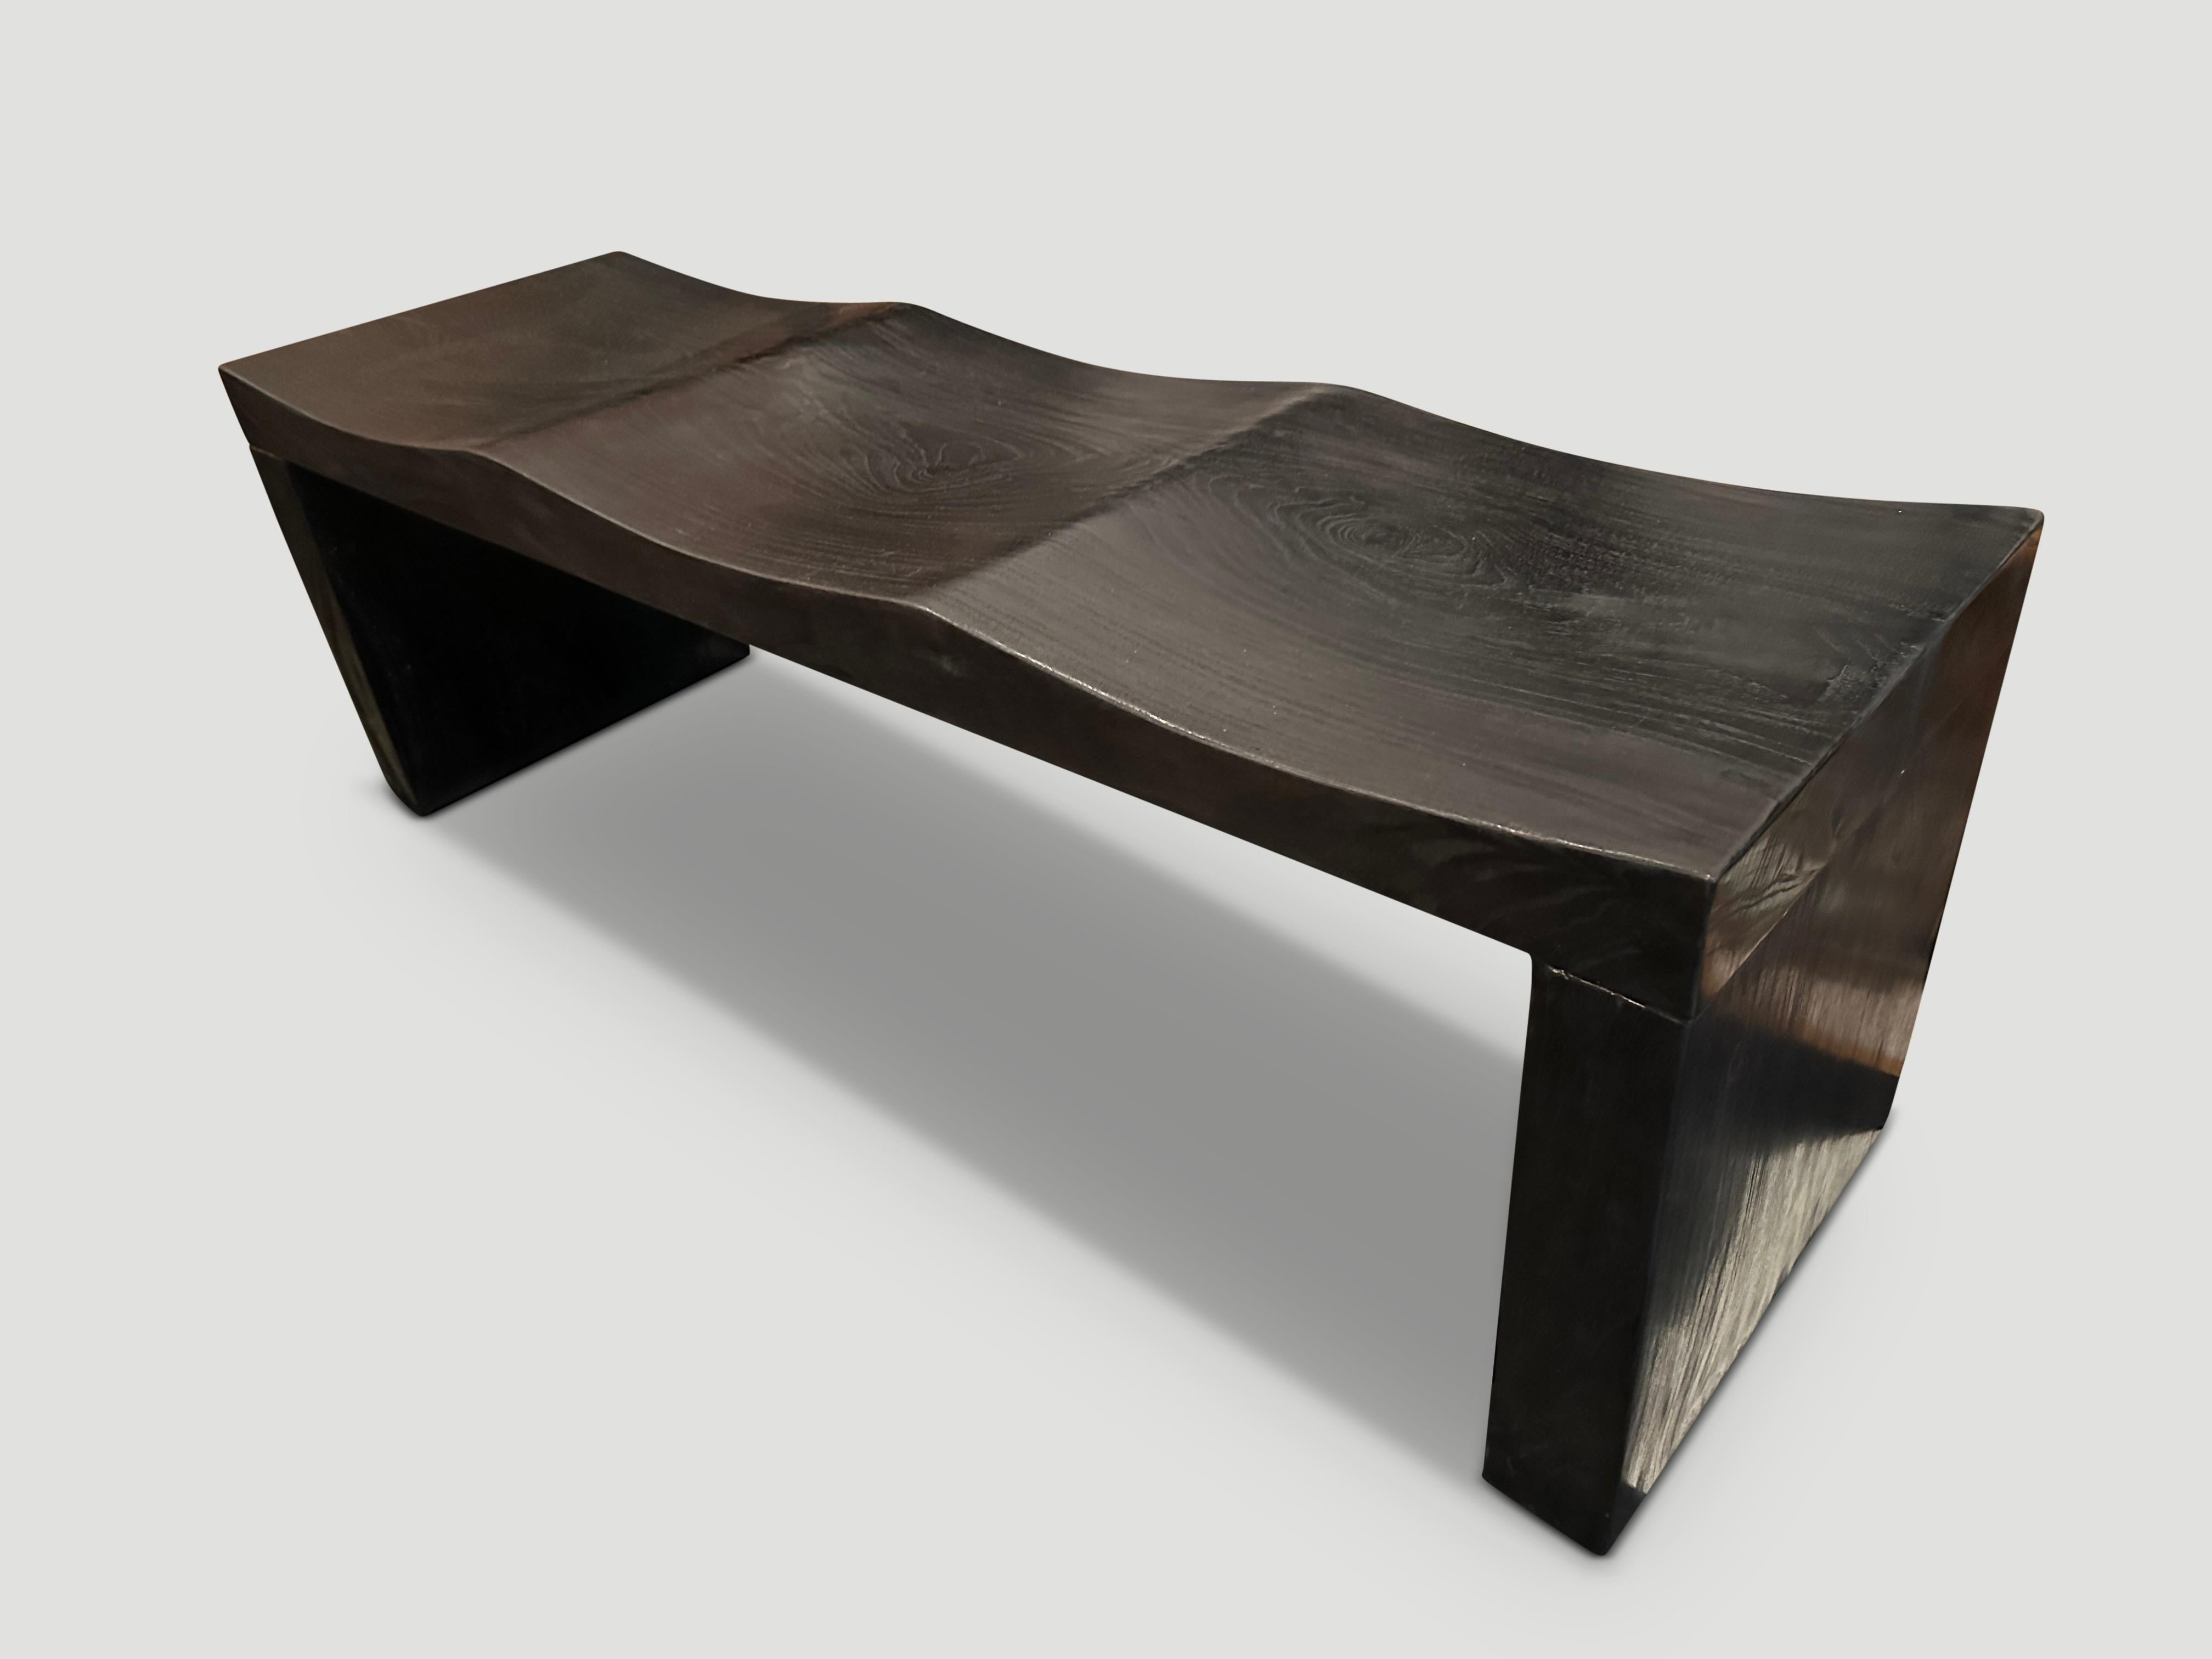 The wave bench represents a sleek, modern aesthetic, designed to provide comfort and durability. Solid reclaimed teak wood is hand carved from a single thick slab into a wave design. Burnt, sanded and sealed revealing the beautiful wood grain.